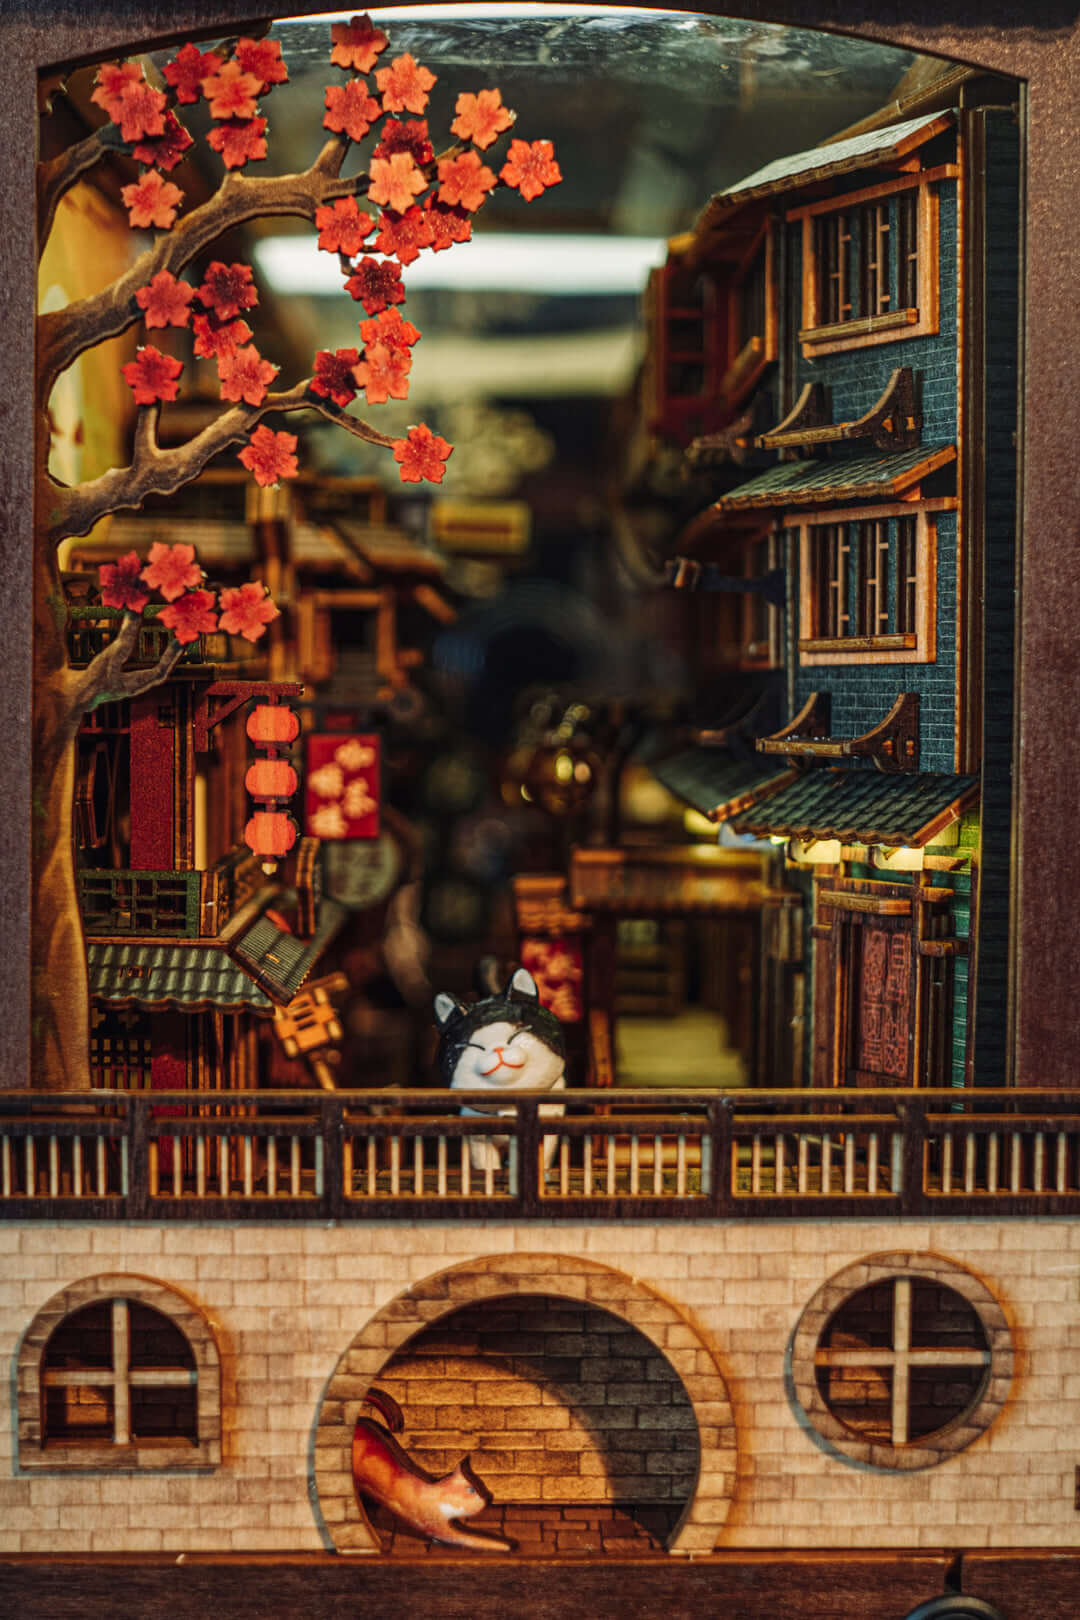 JiuFen Old Street DIY book nook kit featuring cherry blossoms, traditional Chinese roof tiles, vibrant lanterns, and a quaint seaside mountain town